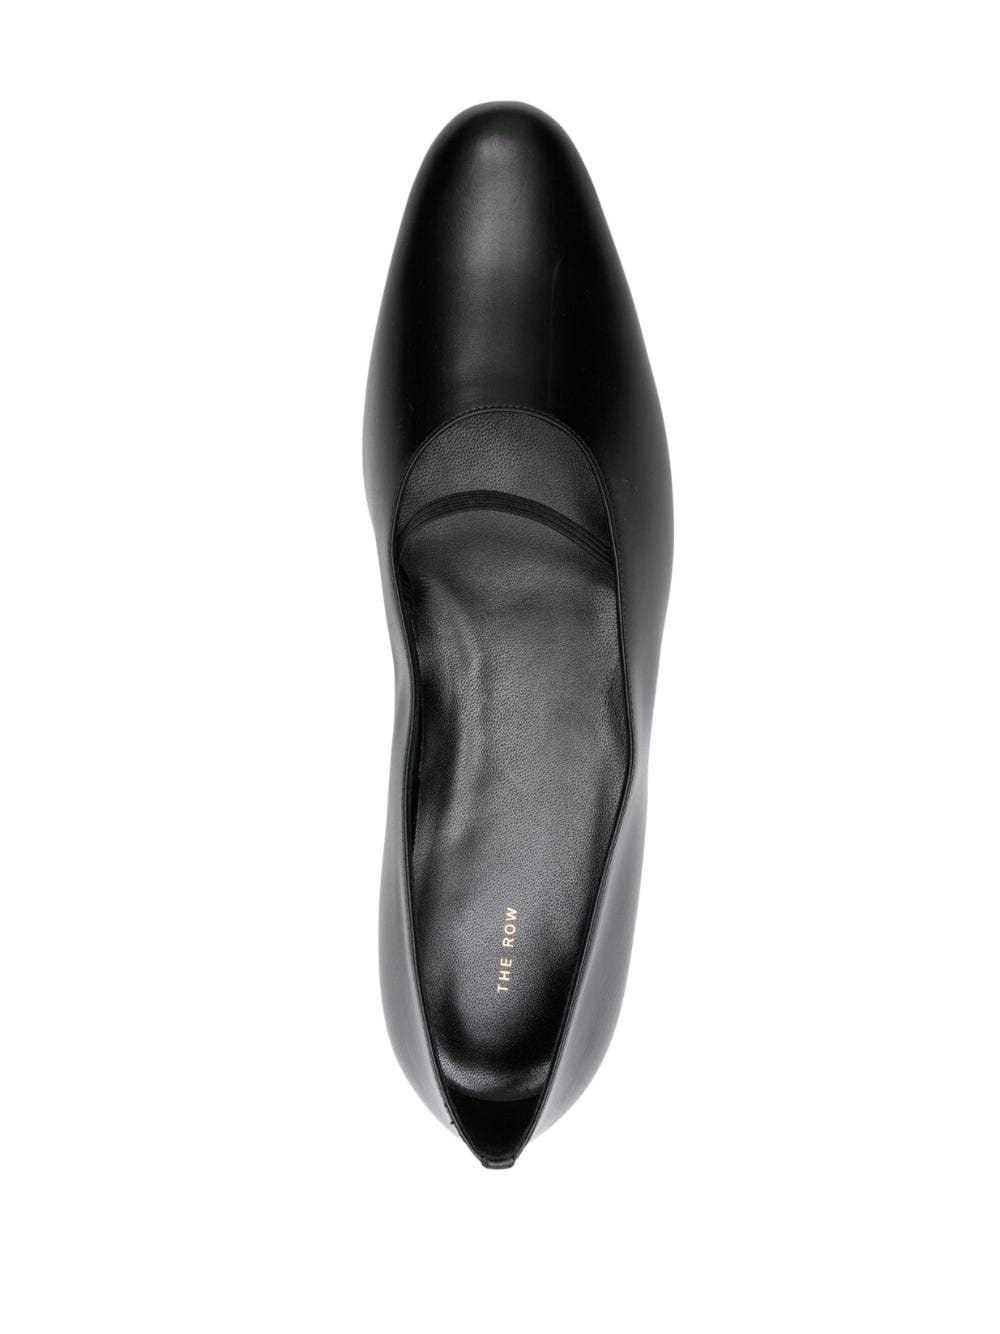 Marion leather ballerina shoes - 4